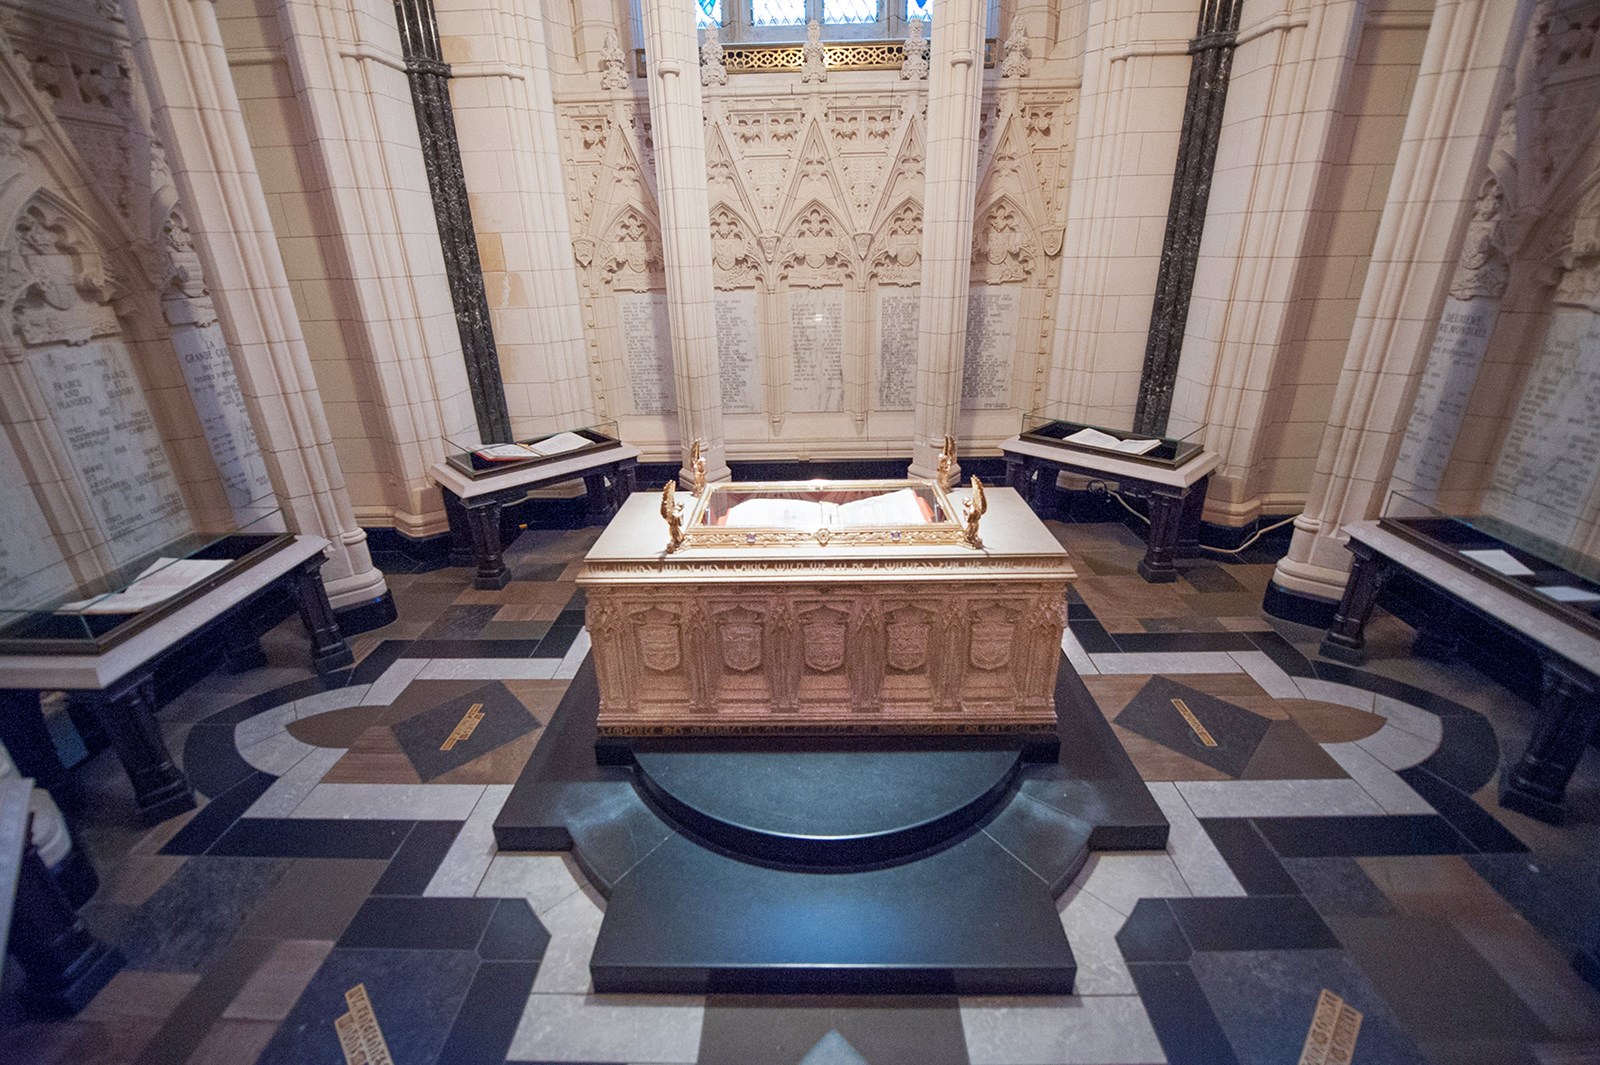 Mr. Smith was part of a team that sculpted the seven memorial altars that ring the central altar in Centre Block’s Memorial Chamber. The altars were designed by former Dominion Sculptor Phil White. (Photo credit: Public Services and Procurement Canada)